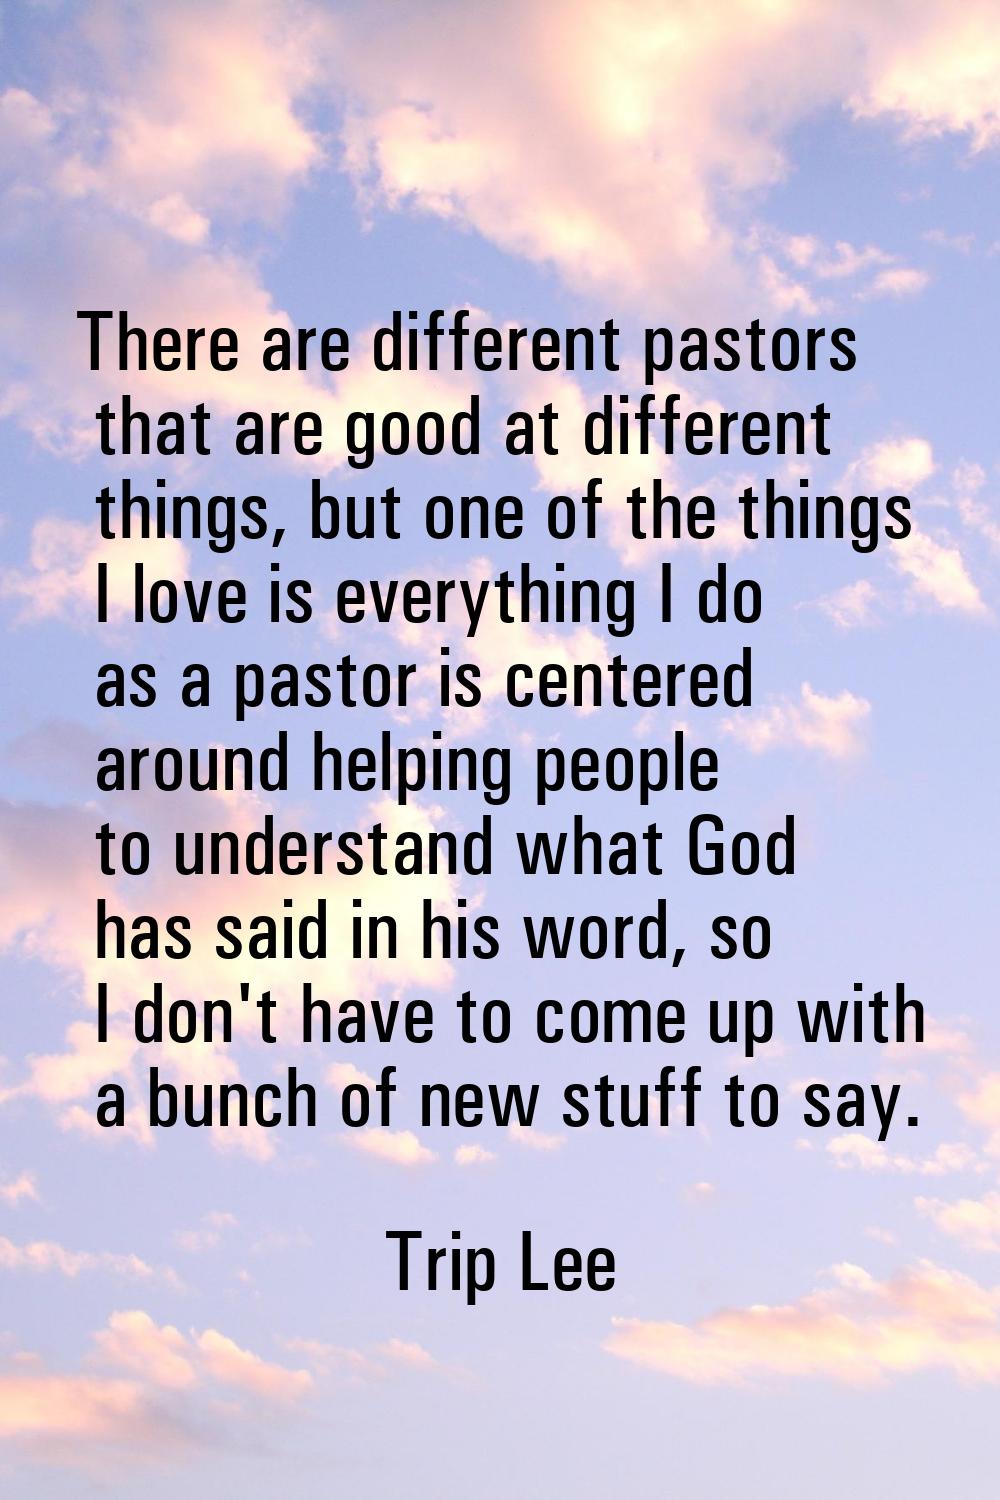 There are different pastors that are good at different things, but one of the things I love is ever